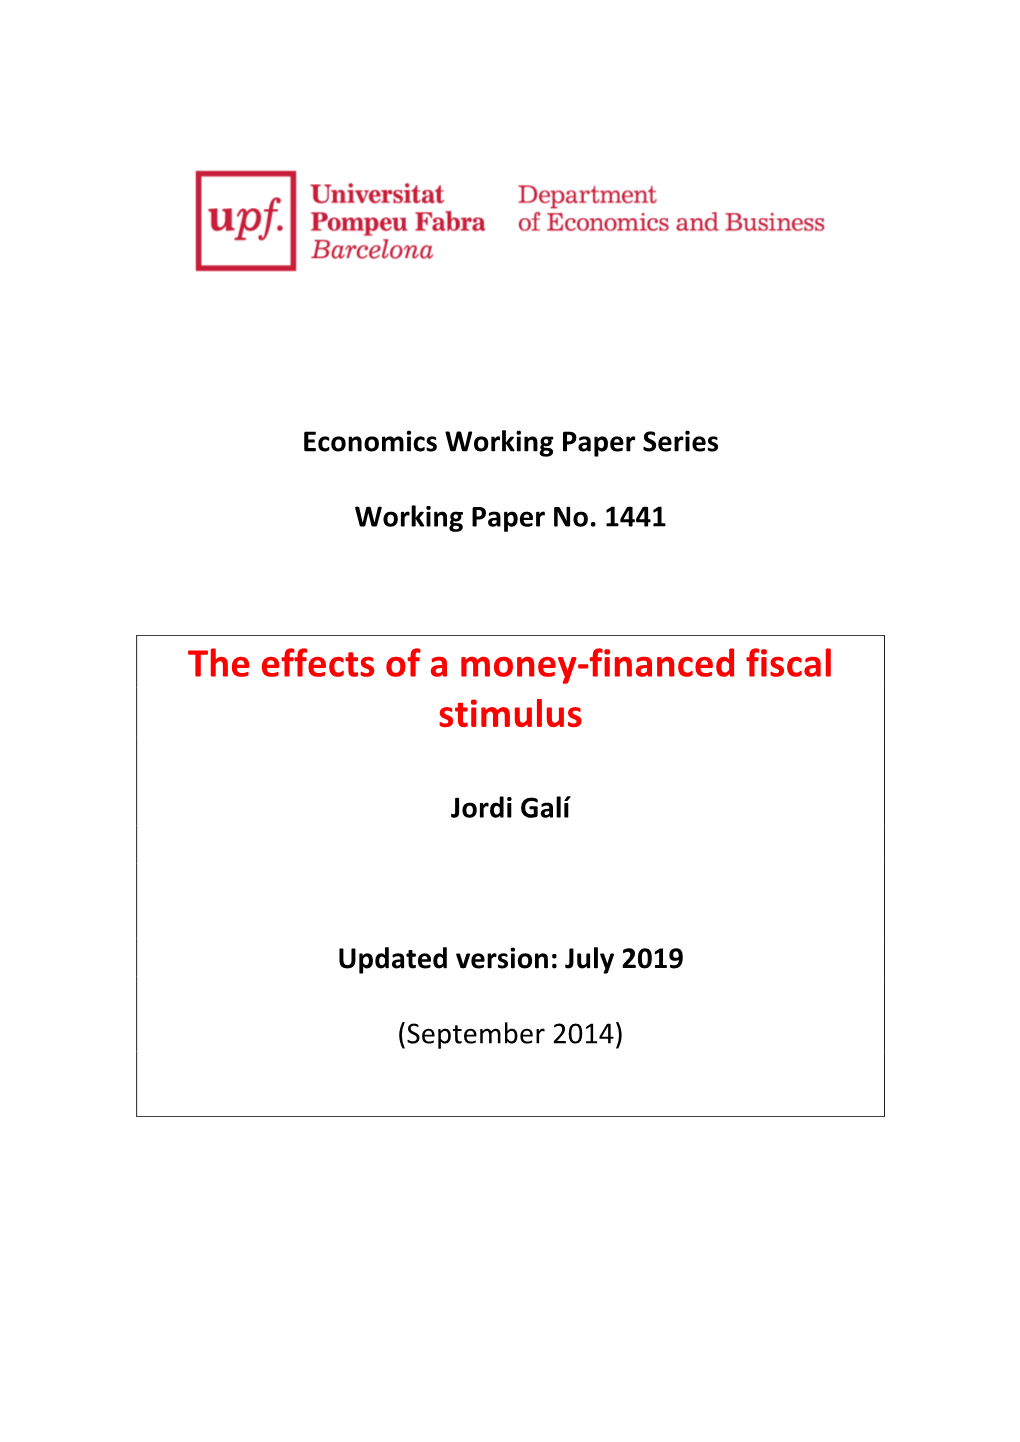 The Effects of a Money-Financed Fiscal Stimulus